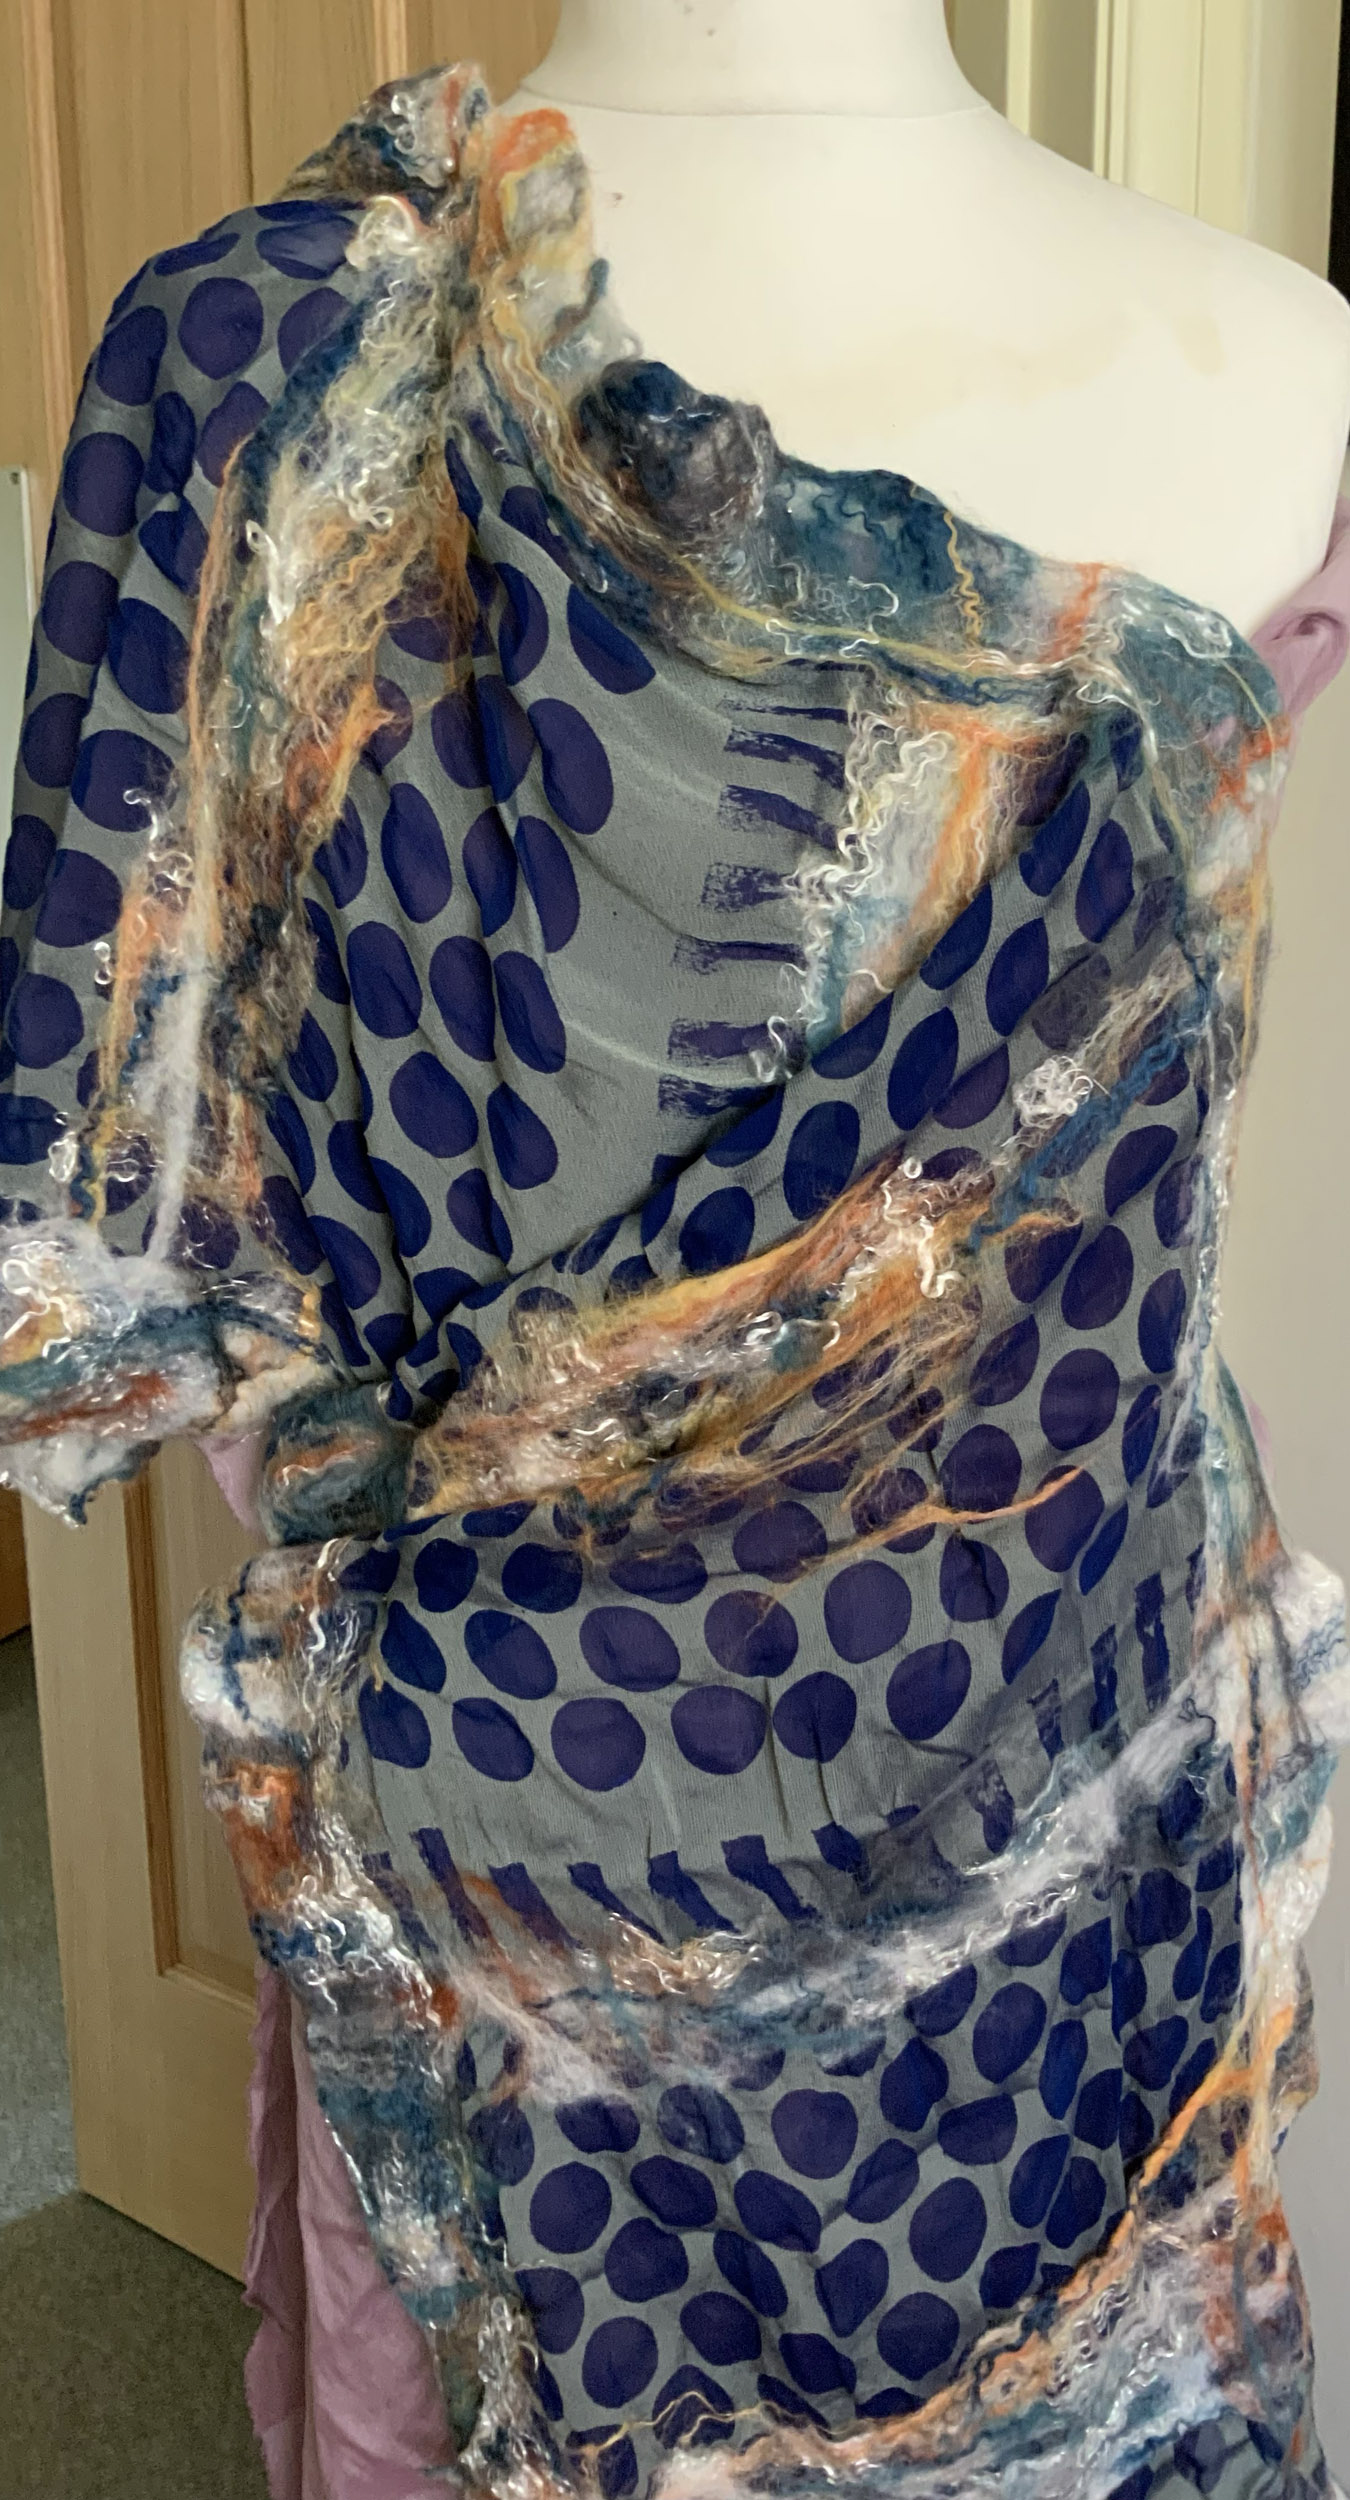 A blue and grey scarf using devore techniques draped over a mannequin.